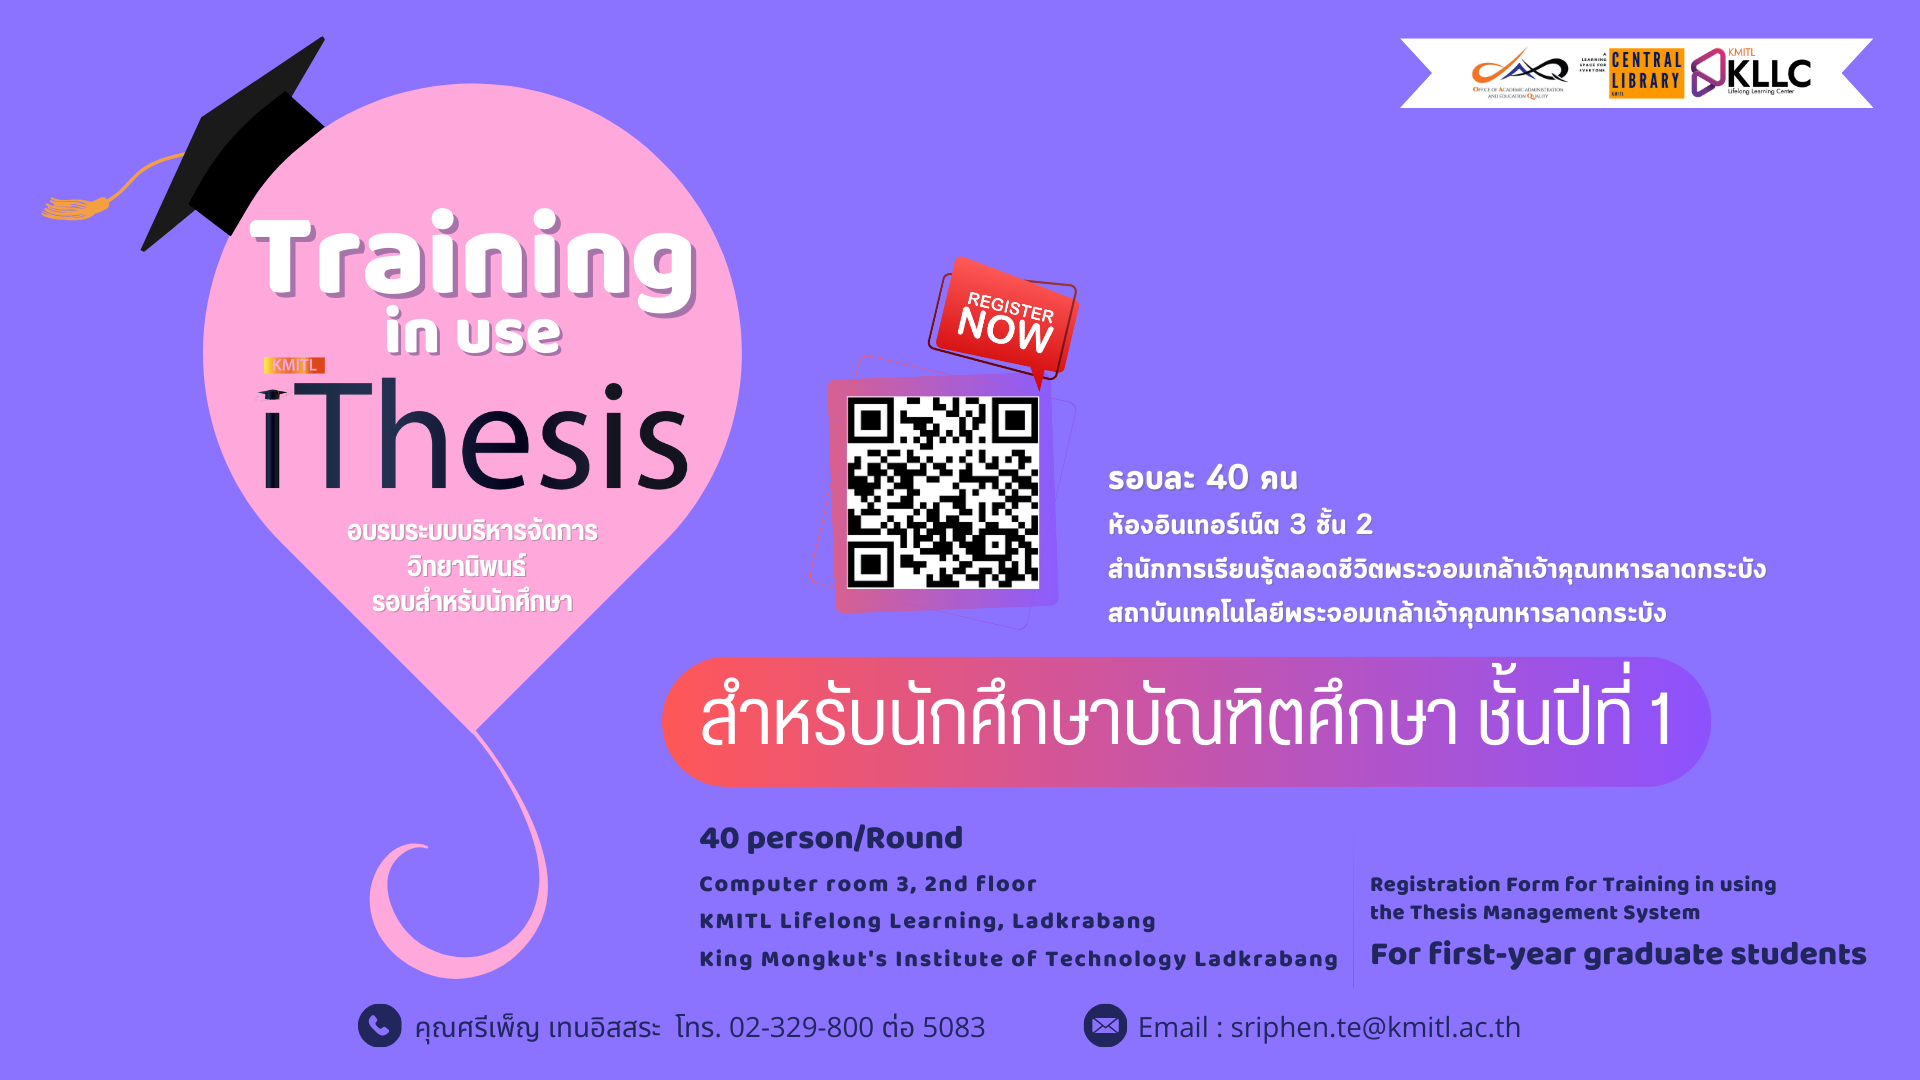 Course poster